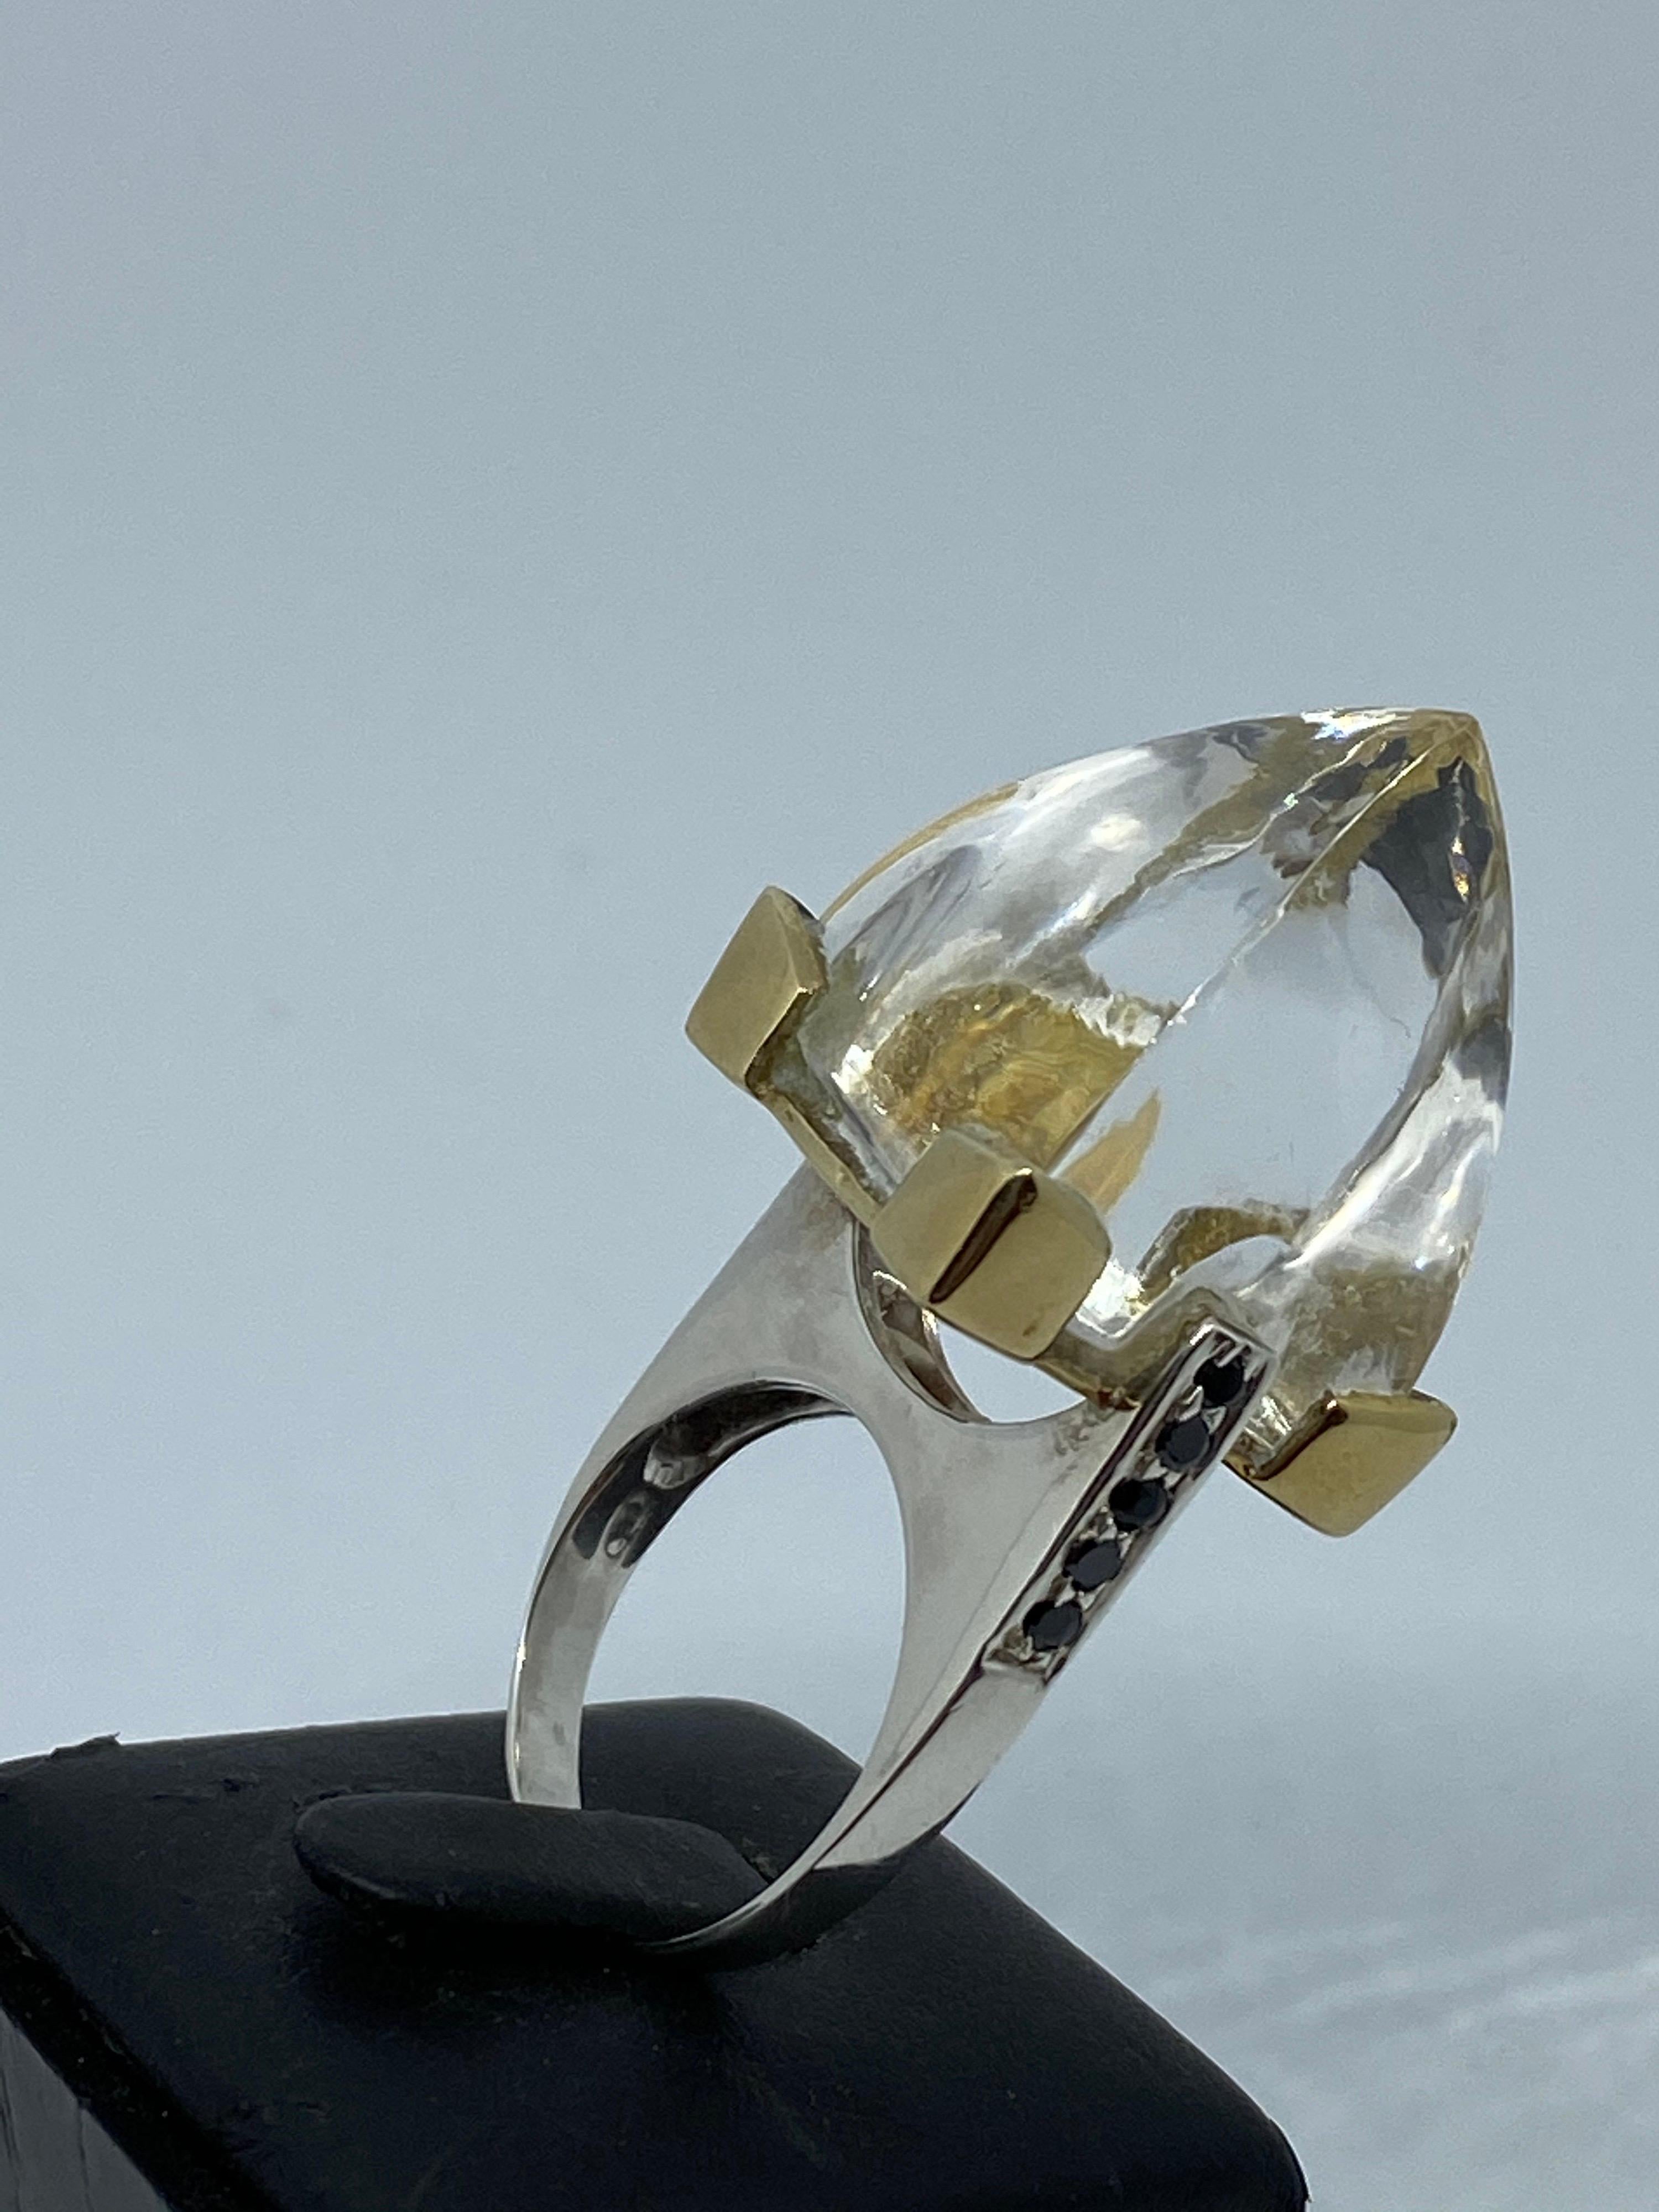 Make a statement with this pointy unique ring. Measures 2 inches and 3/4 in length and has a large pointed Sugarloaf Quartz Crystal set with 10 round black onyx gemstones and Gold plated prongs holding the Crystal in place, the whole ring is in